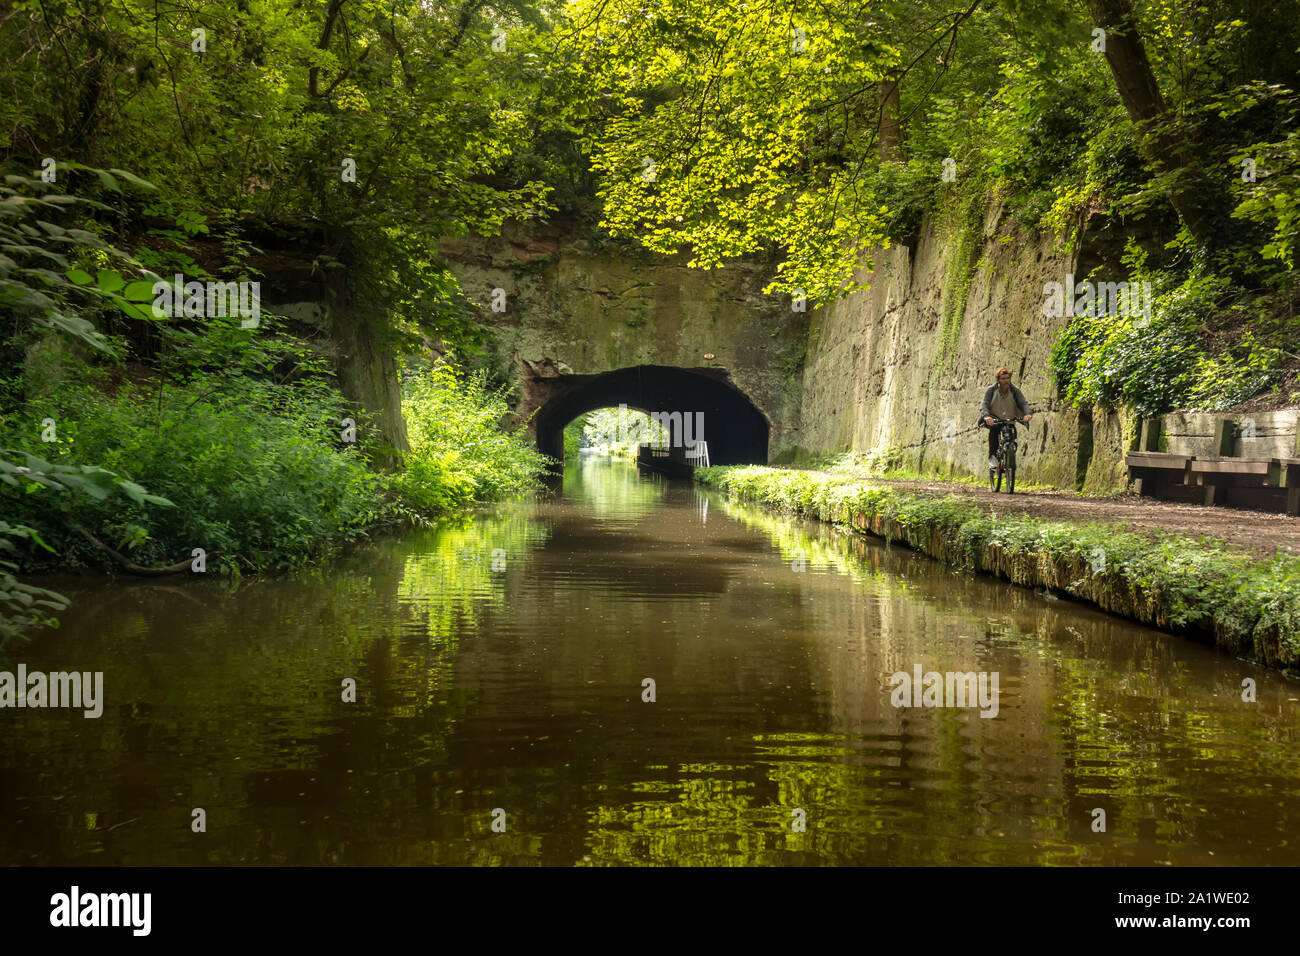 A man cycles along a towpath on The Shropshire Union Canal in England. Stock Photo